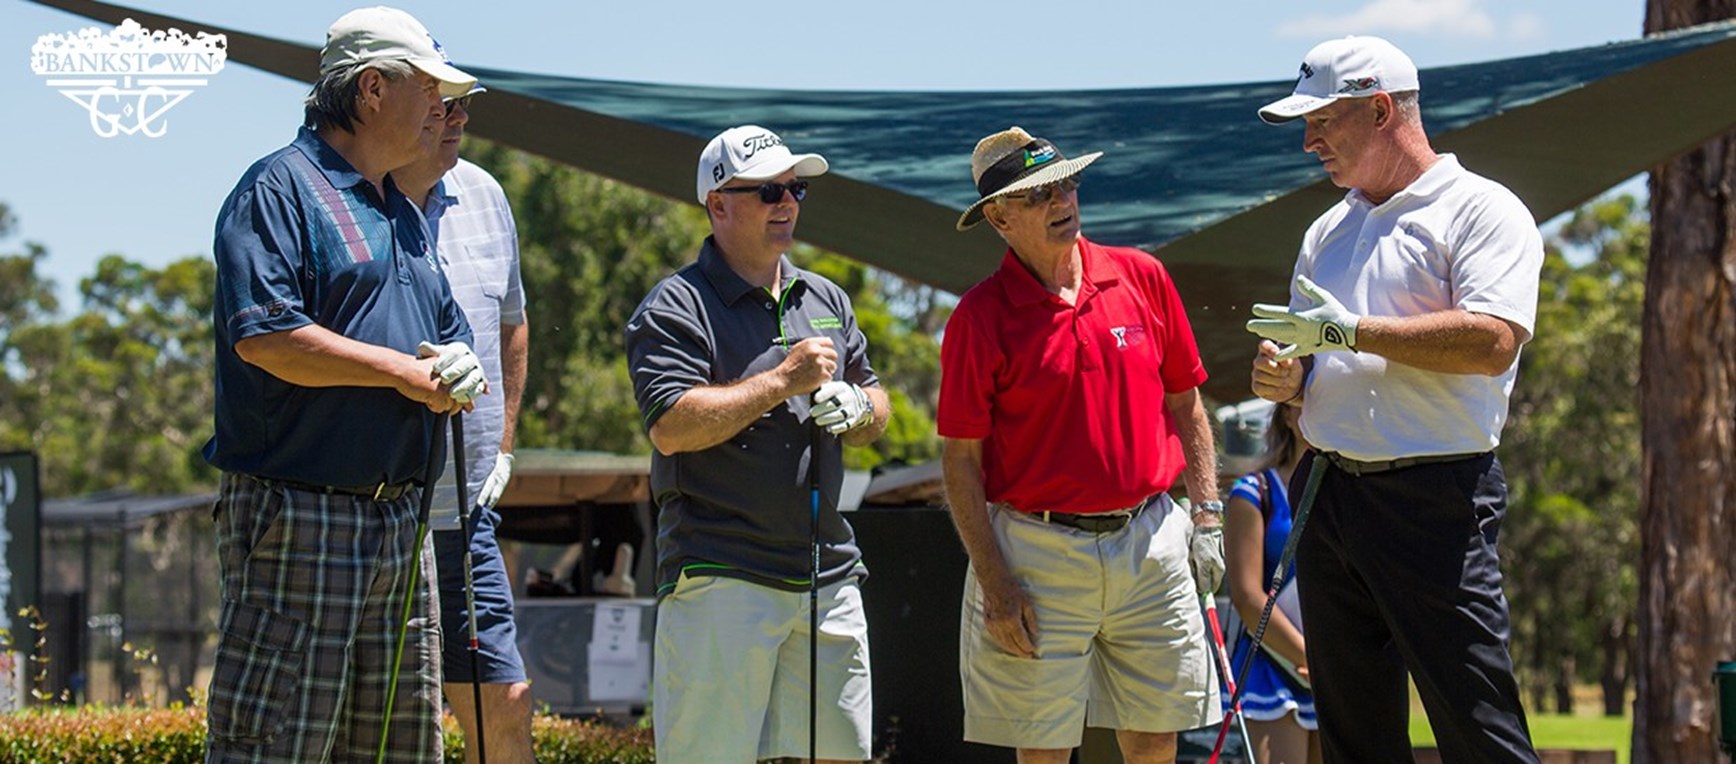 GALLERY: Corporate Golf Day